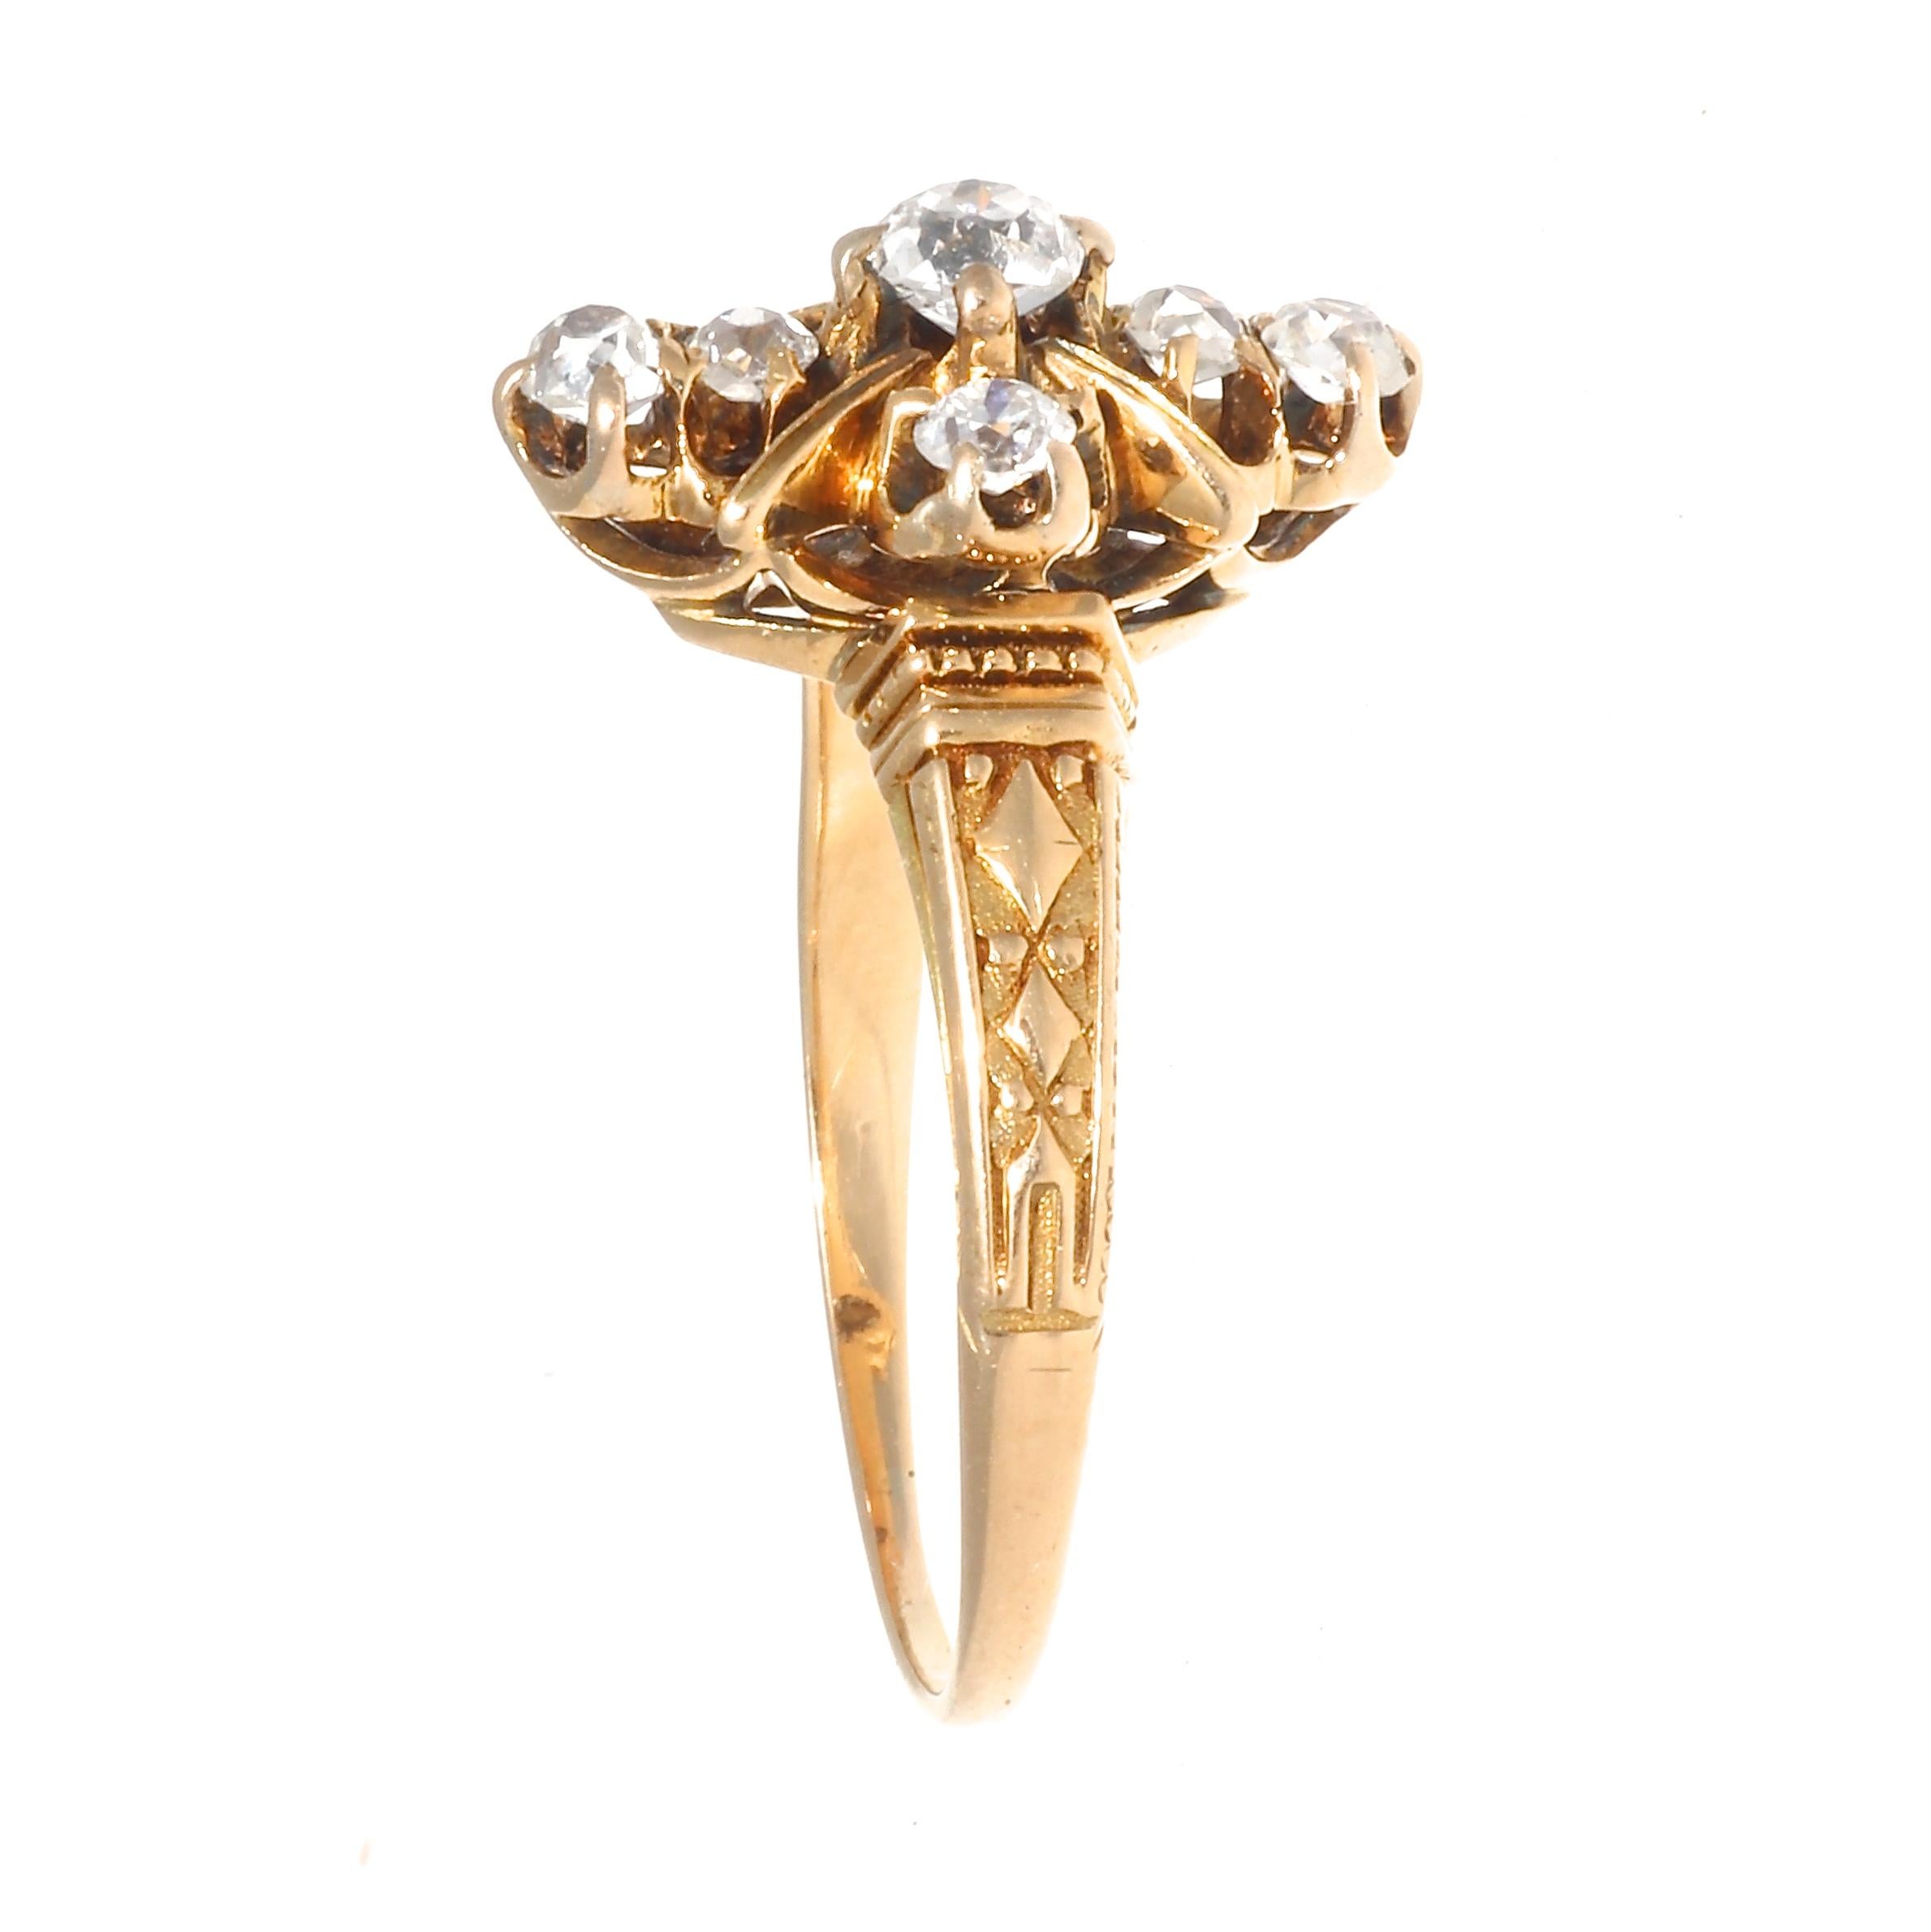 Beautiful Victorian diamond 14k yellow gold ring. Featuring 7 old mine cut diamonds that weigh approximately 0.40 carats, graded G-I color, all VS clarity except one, which is Si clarity. Circa 1800s. Ring size 6 and comes with complimentary sizing